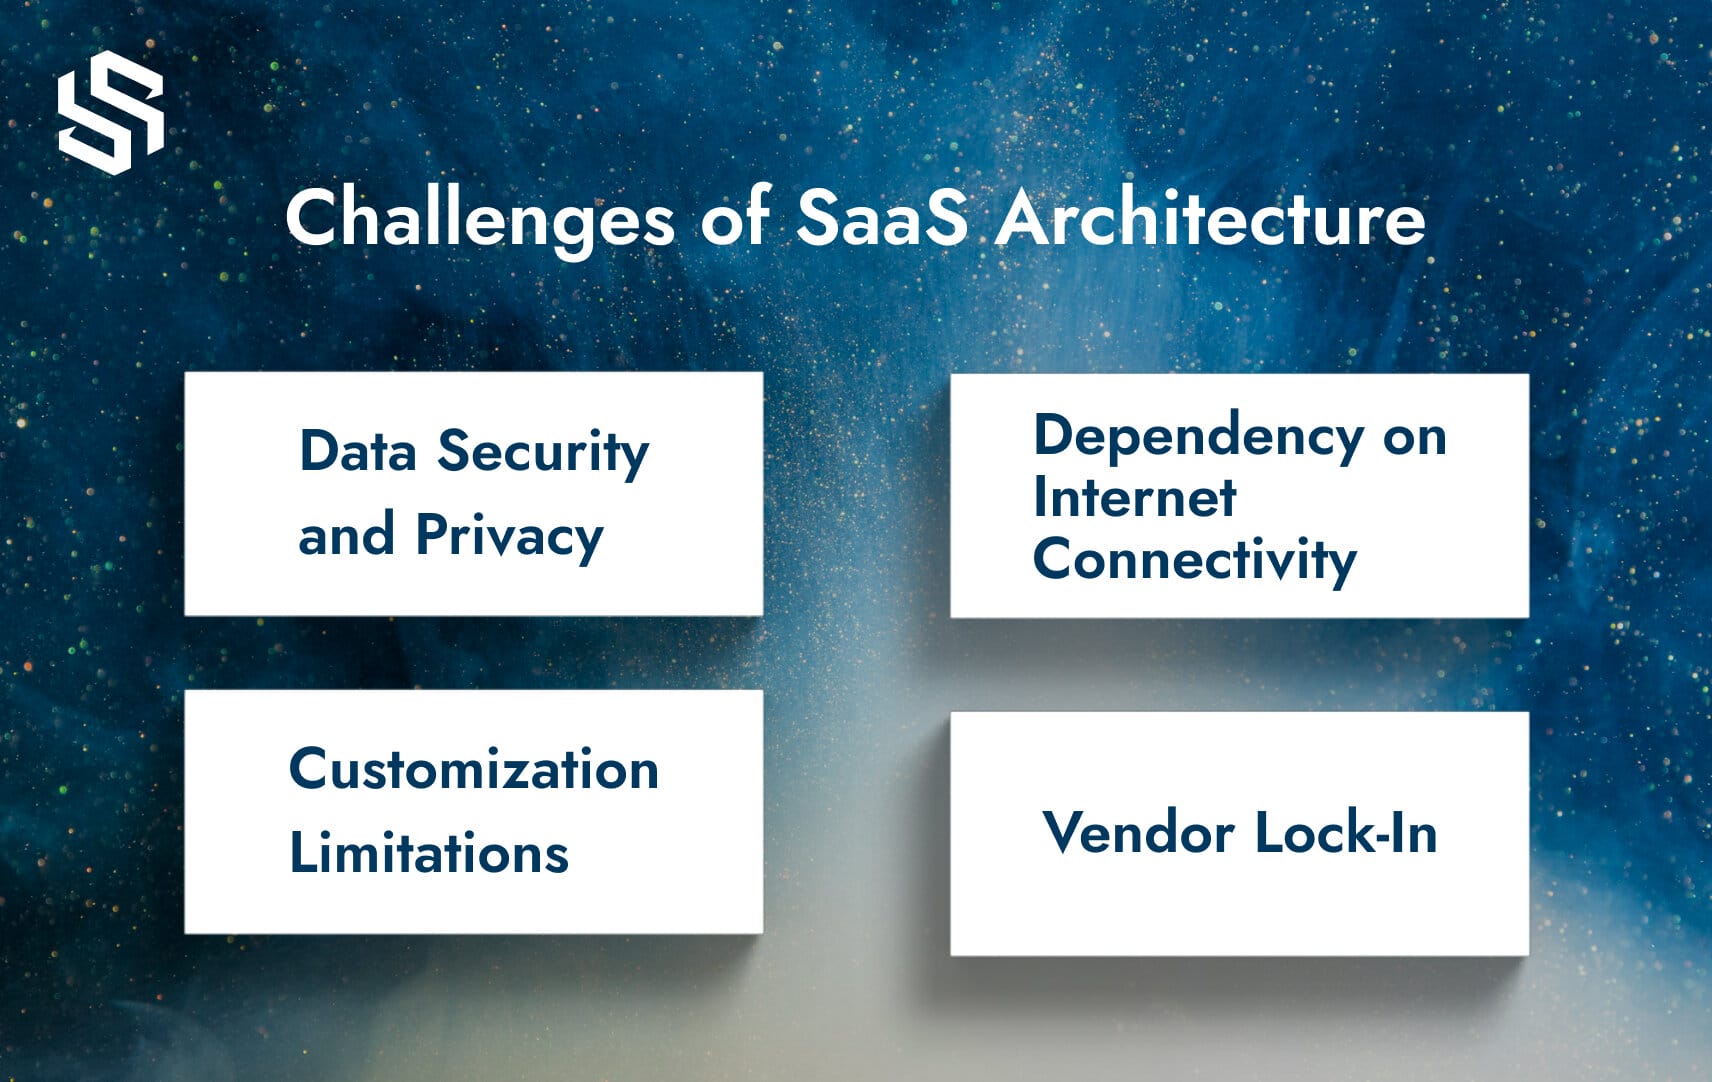 Challenges of SaaS Architecture